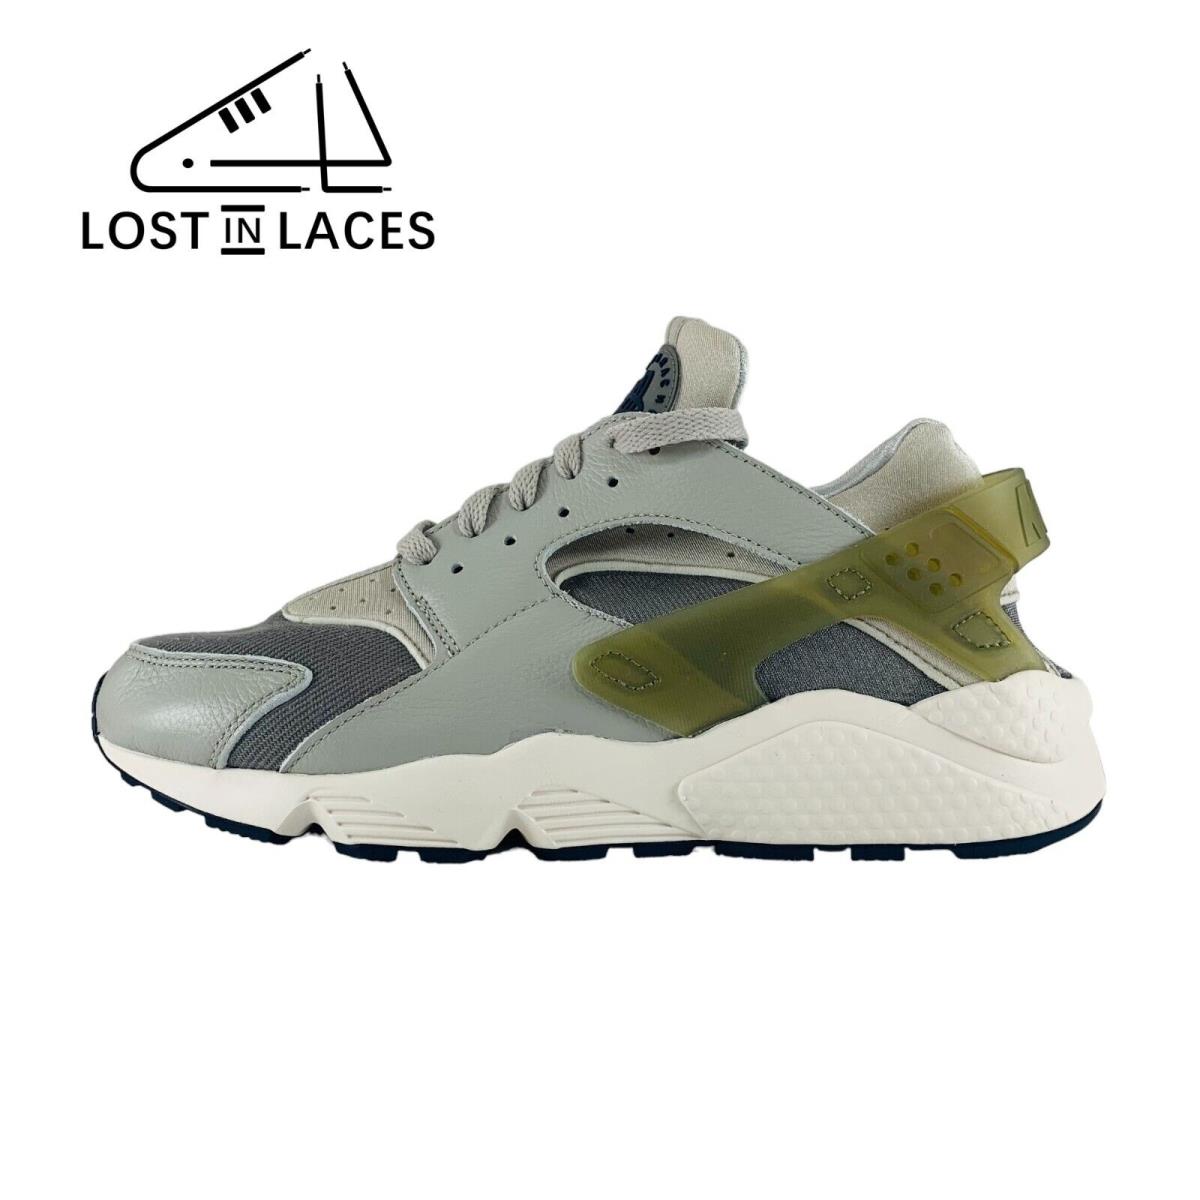 Nike Air Huarache Flat Pewter Grey Lifestyle Sneakers Shoes Men`s Sizes